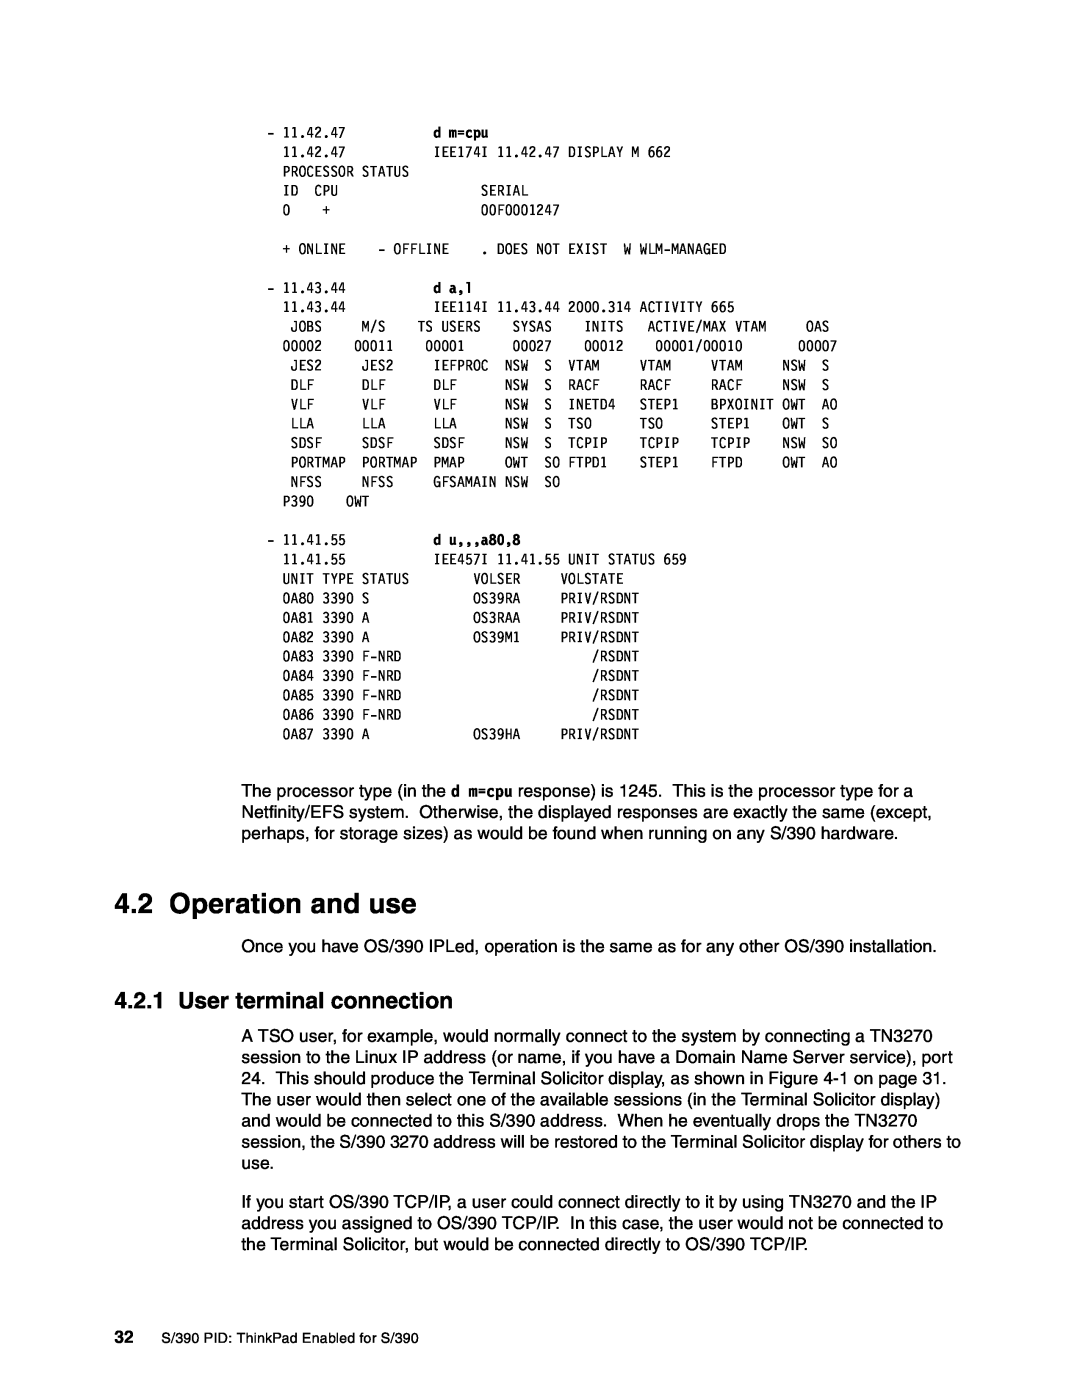 IBM s/390 manual Operation and use, User terminal connection 